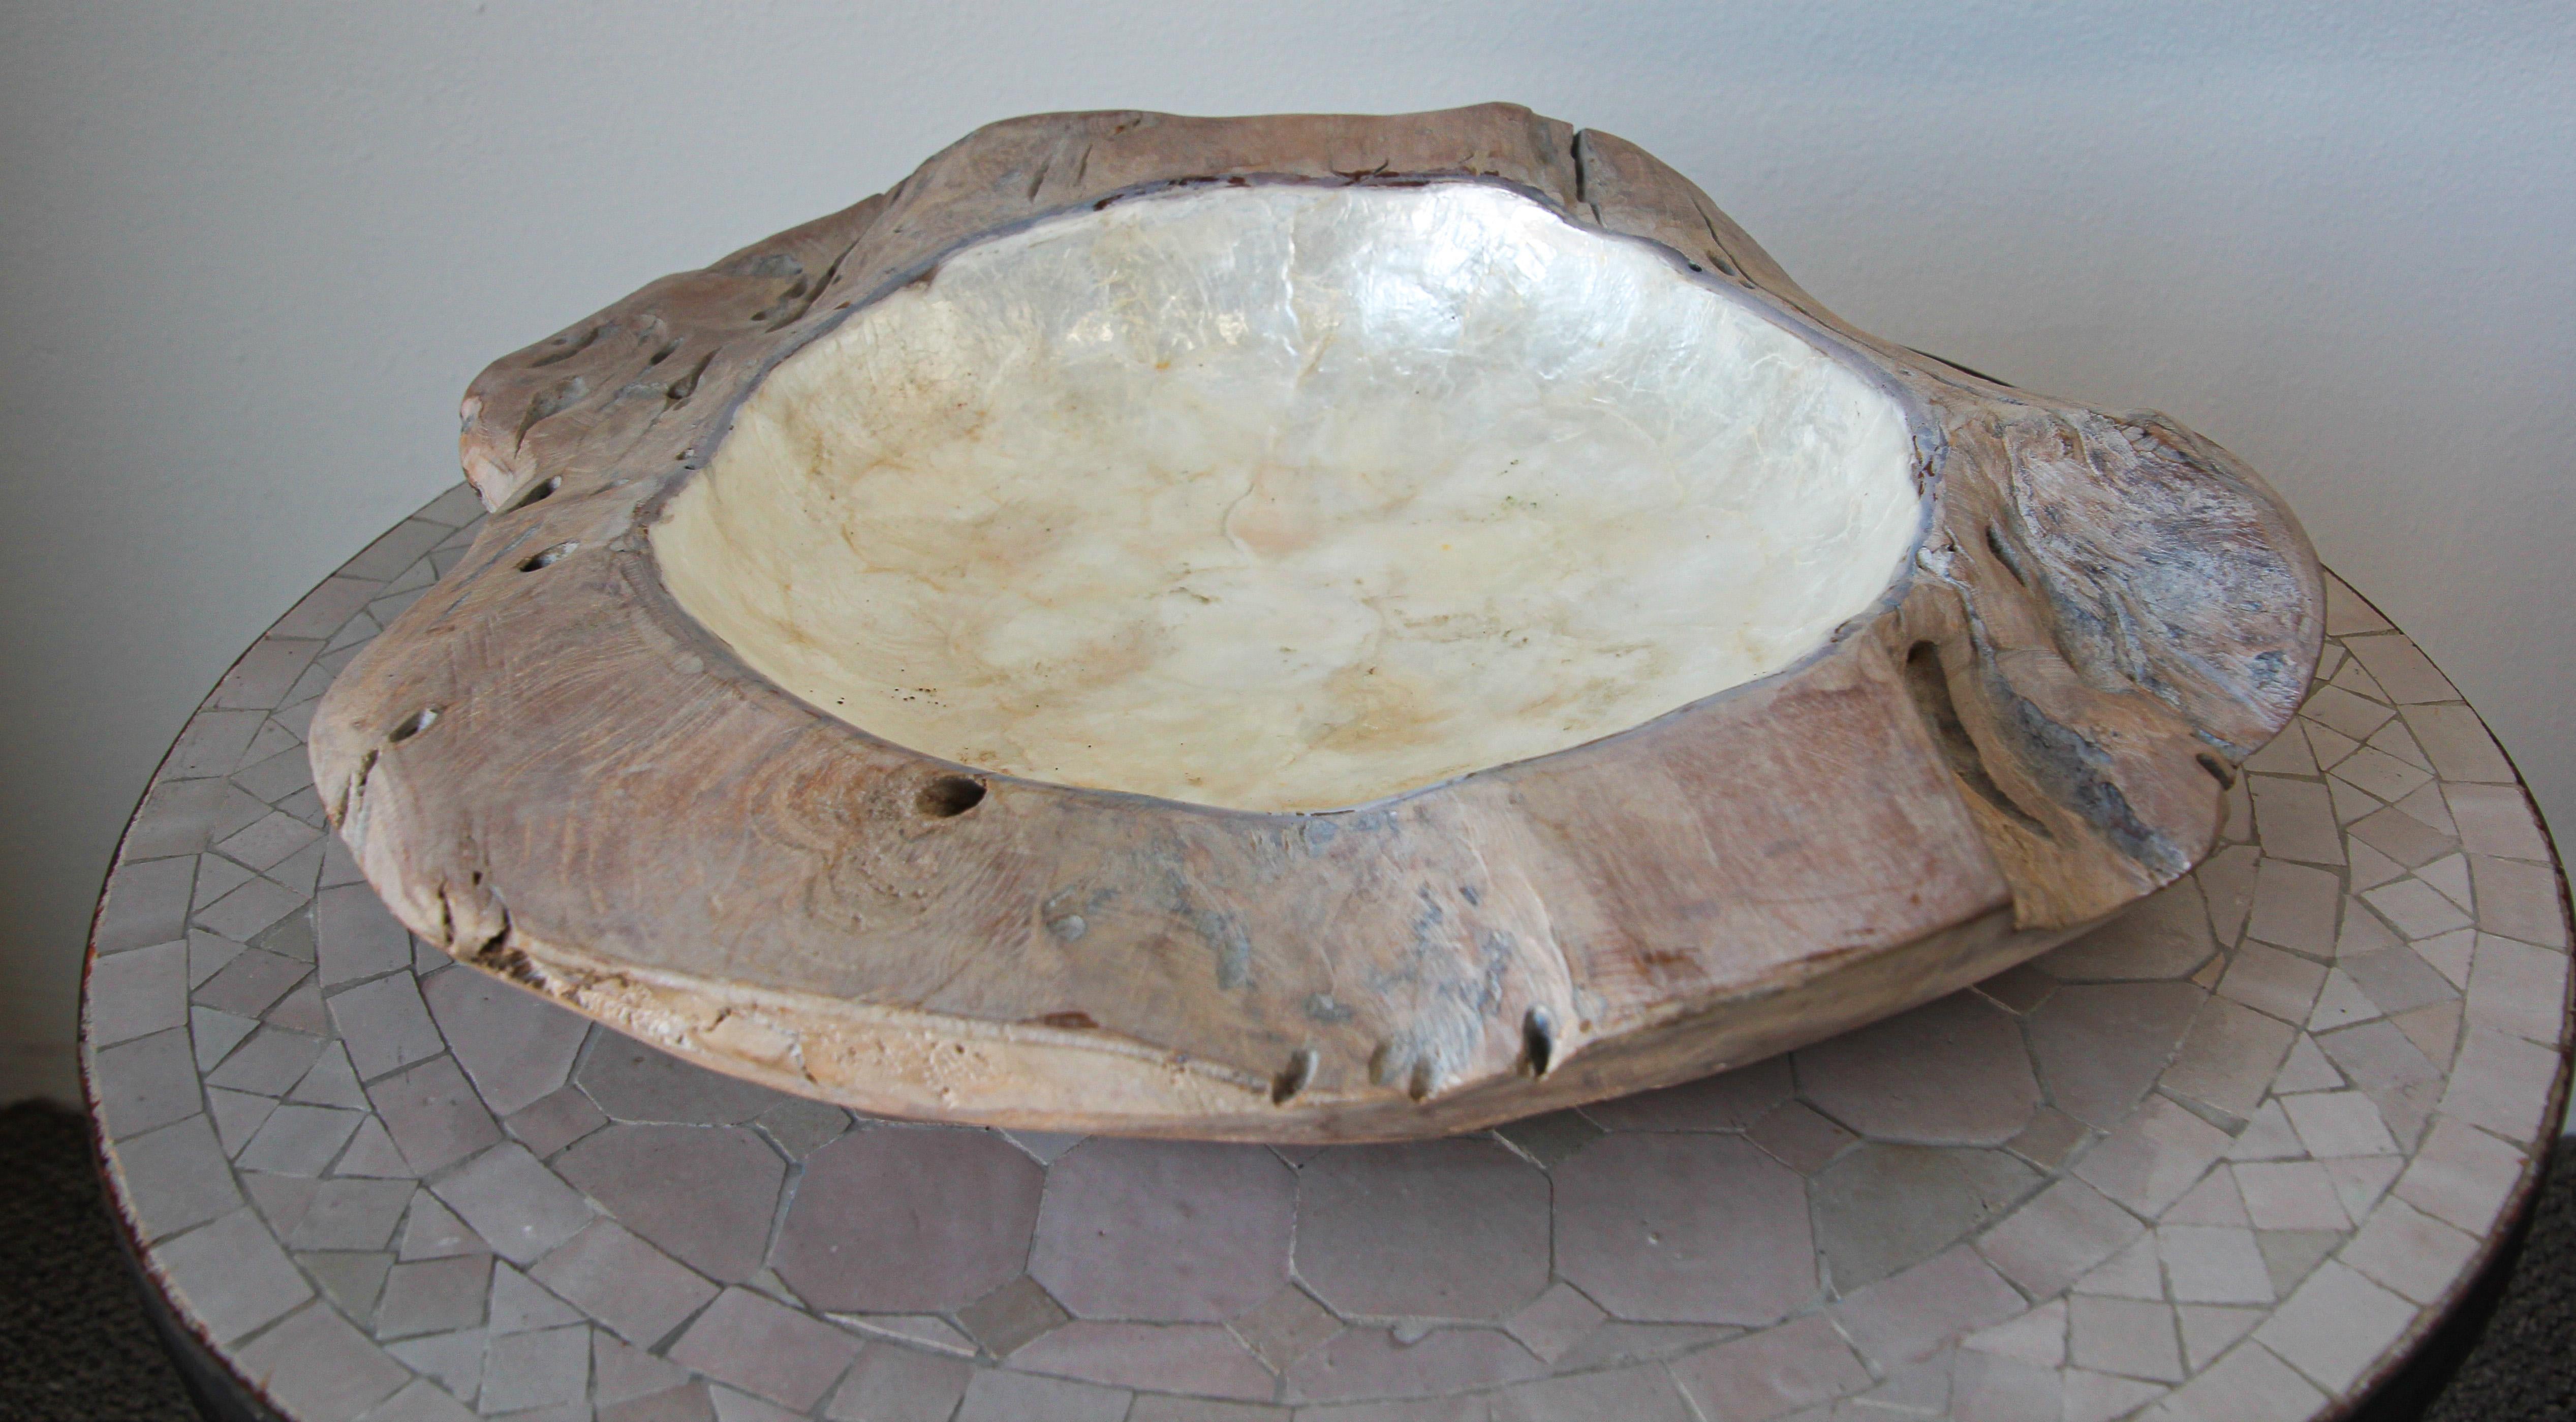 Asian Handcrafted Sculptural Brutalist Freeform Teak Bowl with Capiz Pearl Shell